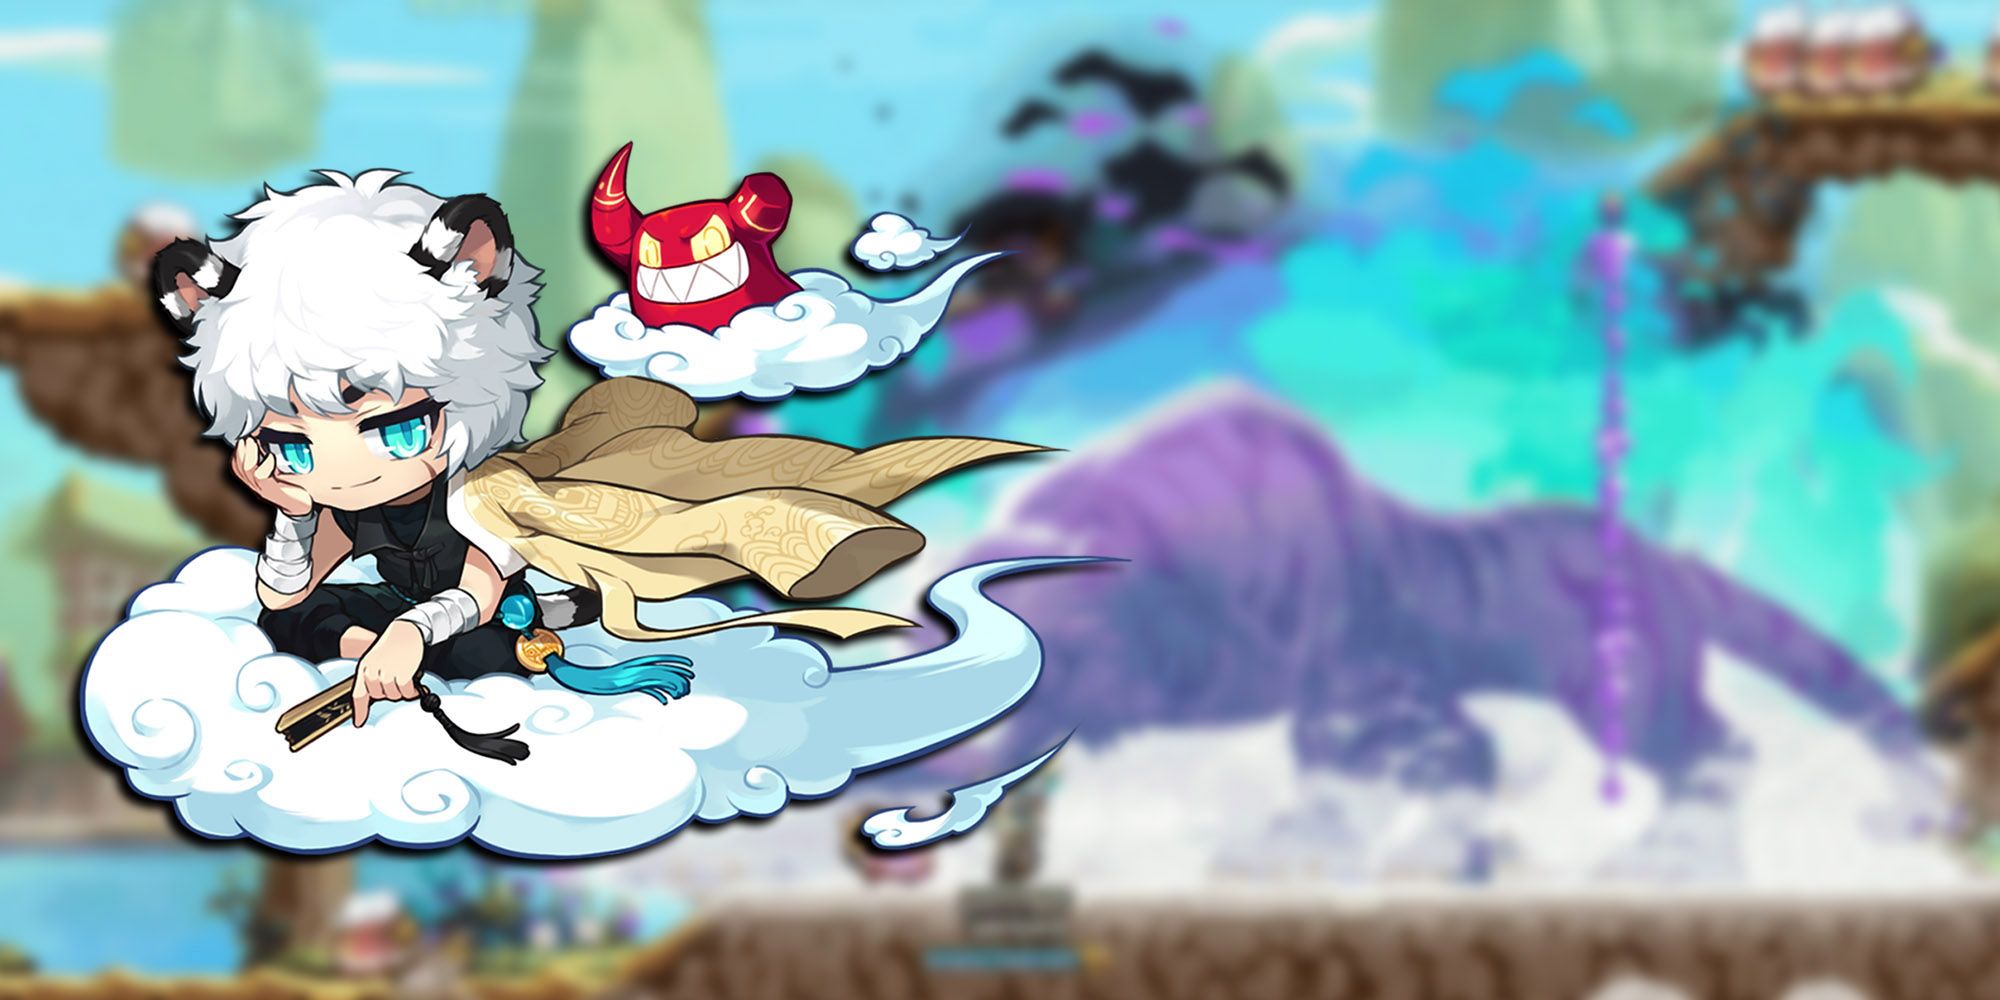 Maplestory - Hoyoung Using Tiger Of Songyu Skill With PNG of Hoyoung Riding Cloud On Top